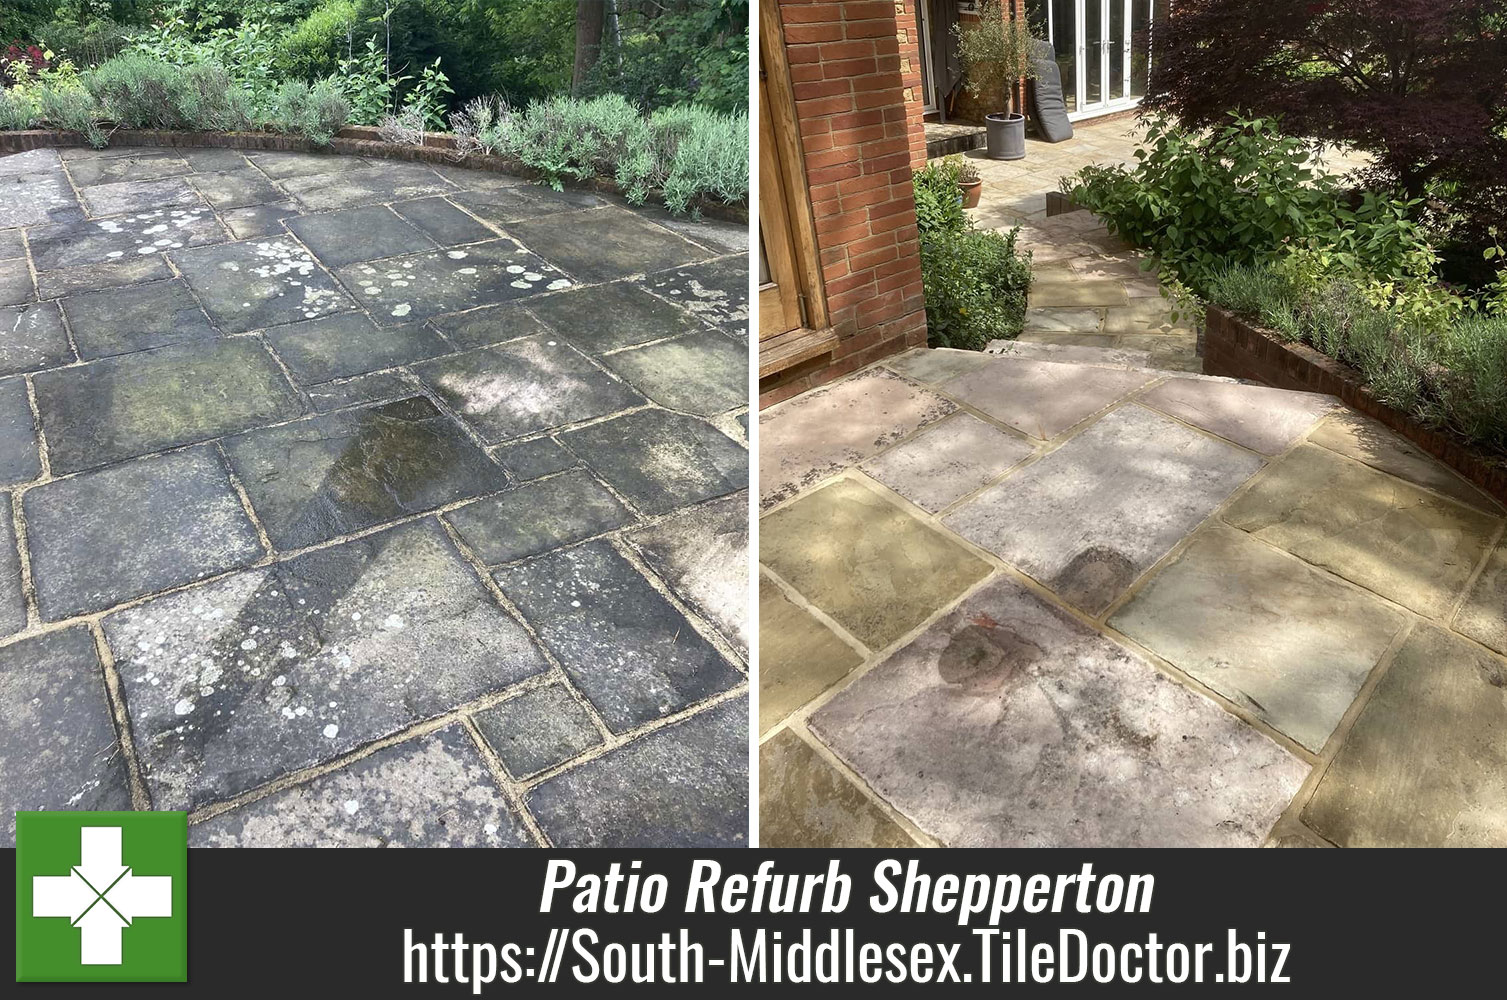 Deep Cleaning a Grubby Yorkstone Patio with Tile Doctor Pro-Clean in Shepperton